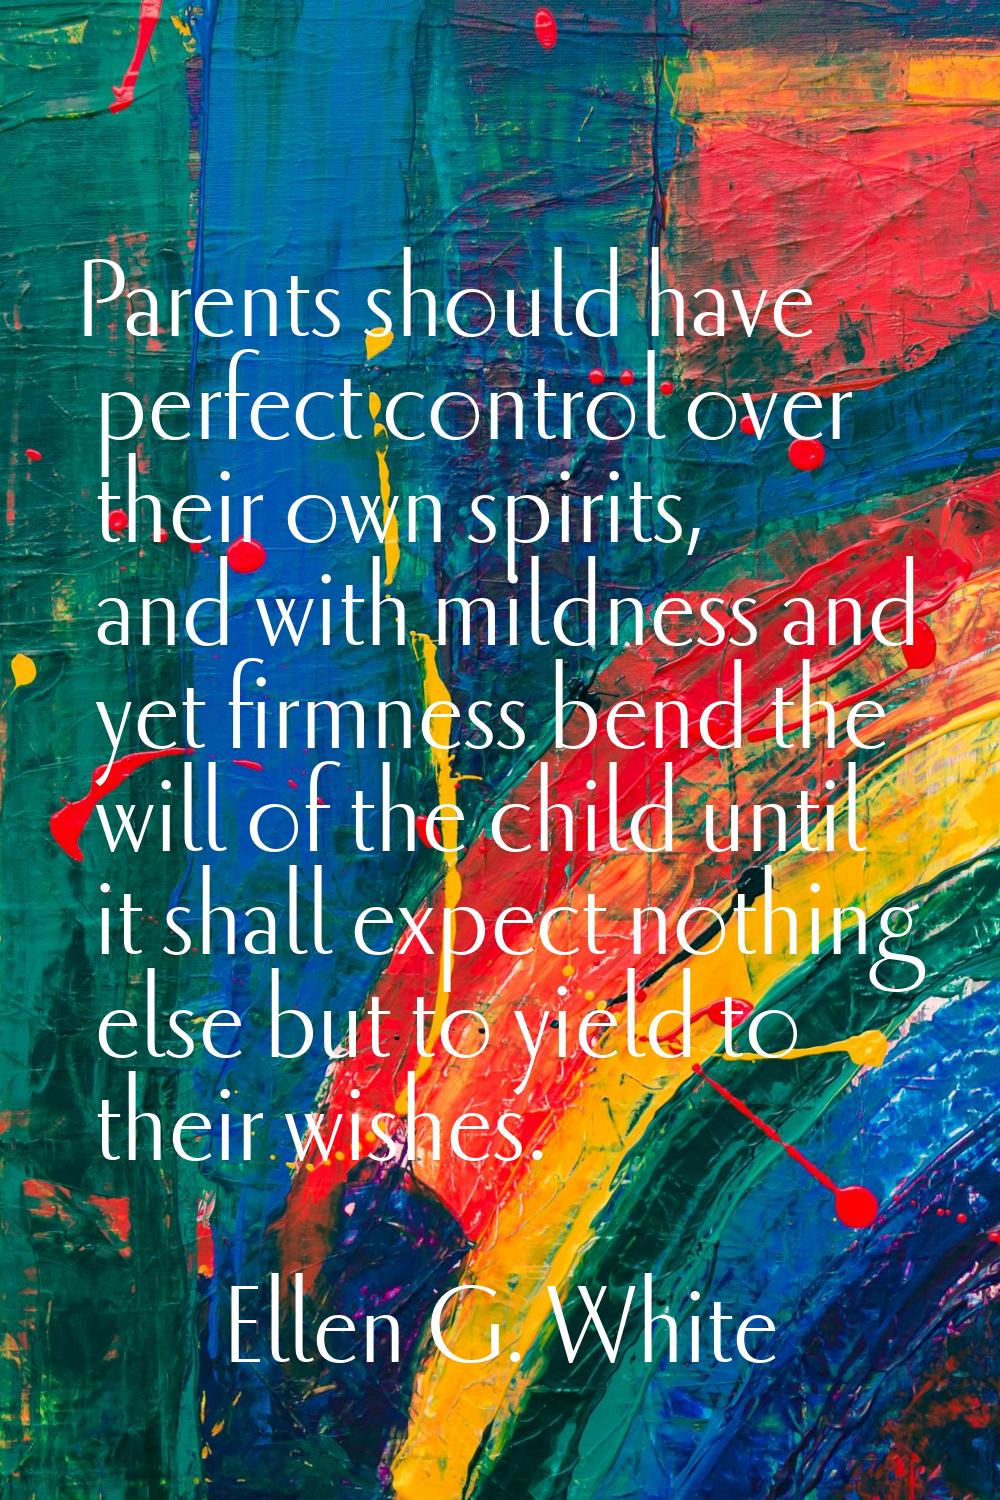 Parents should have perfect control over their own spirits, and with mildness and yet firmness bend